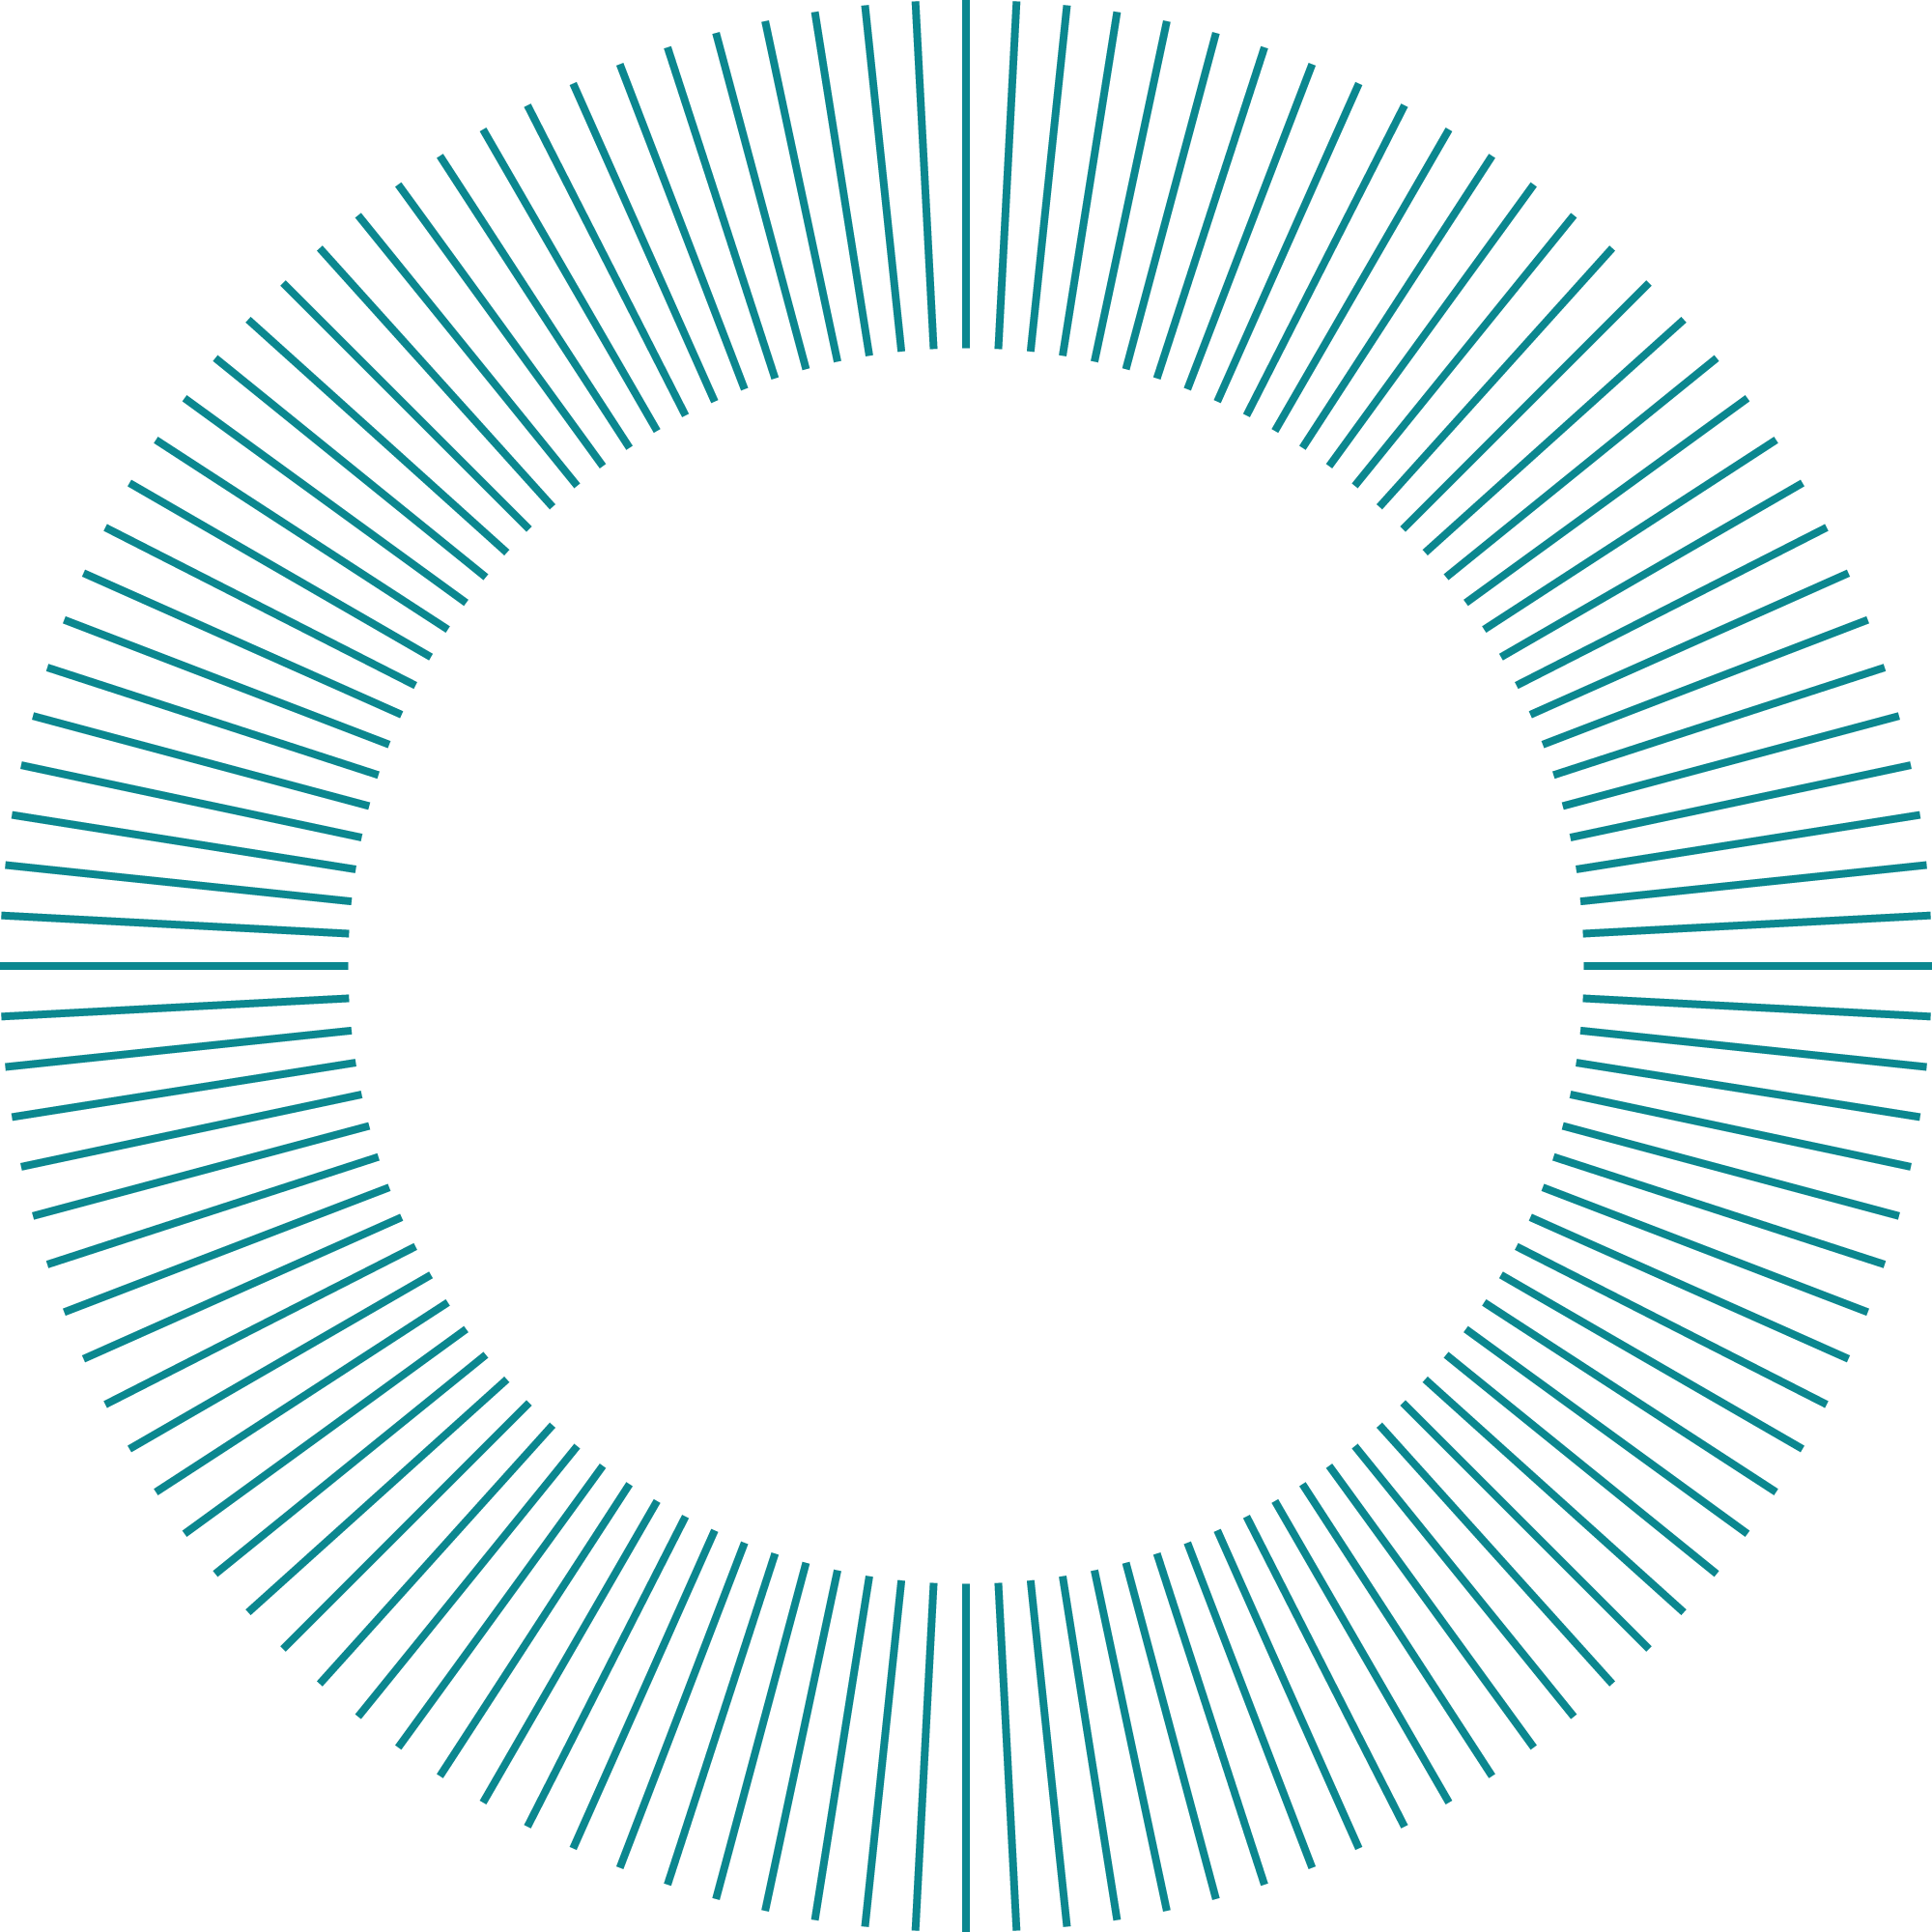 Lines arranged in a circle pattern